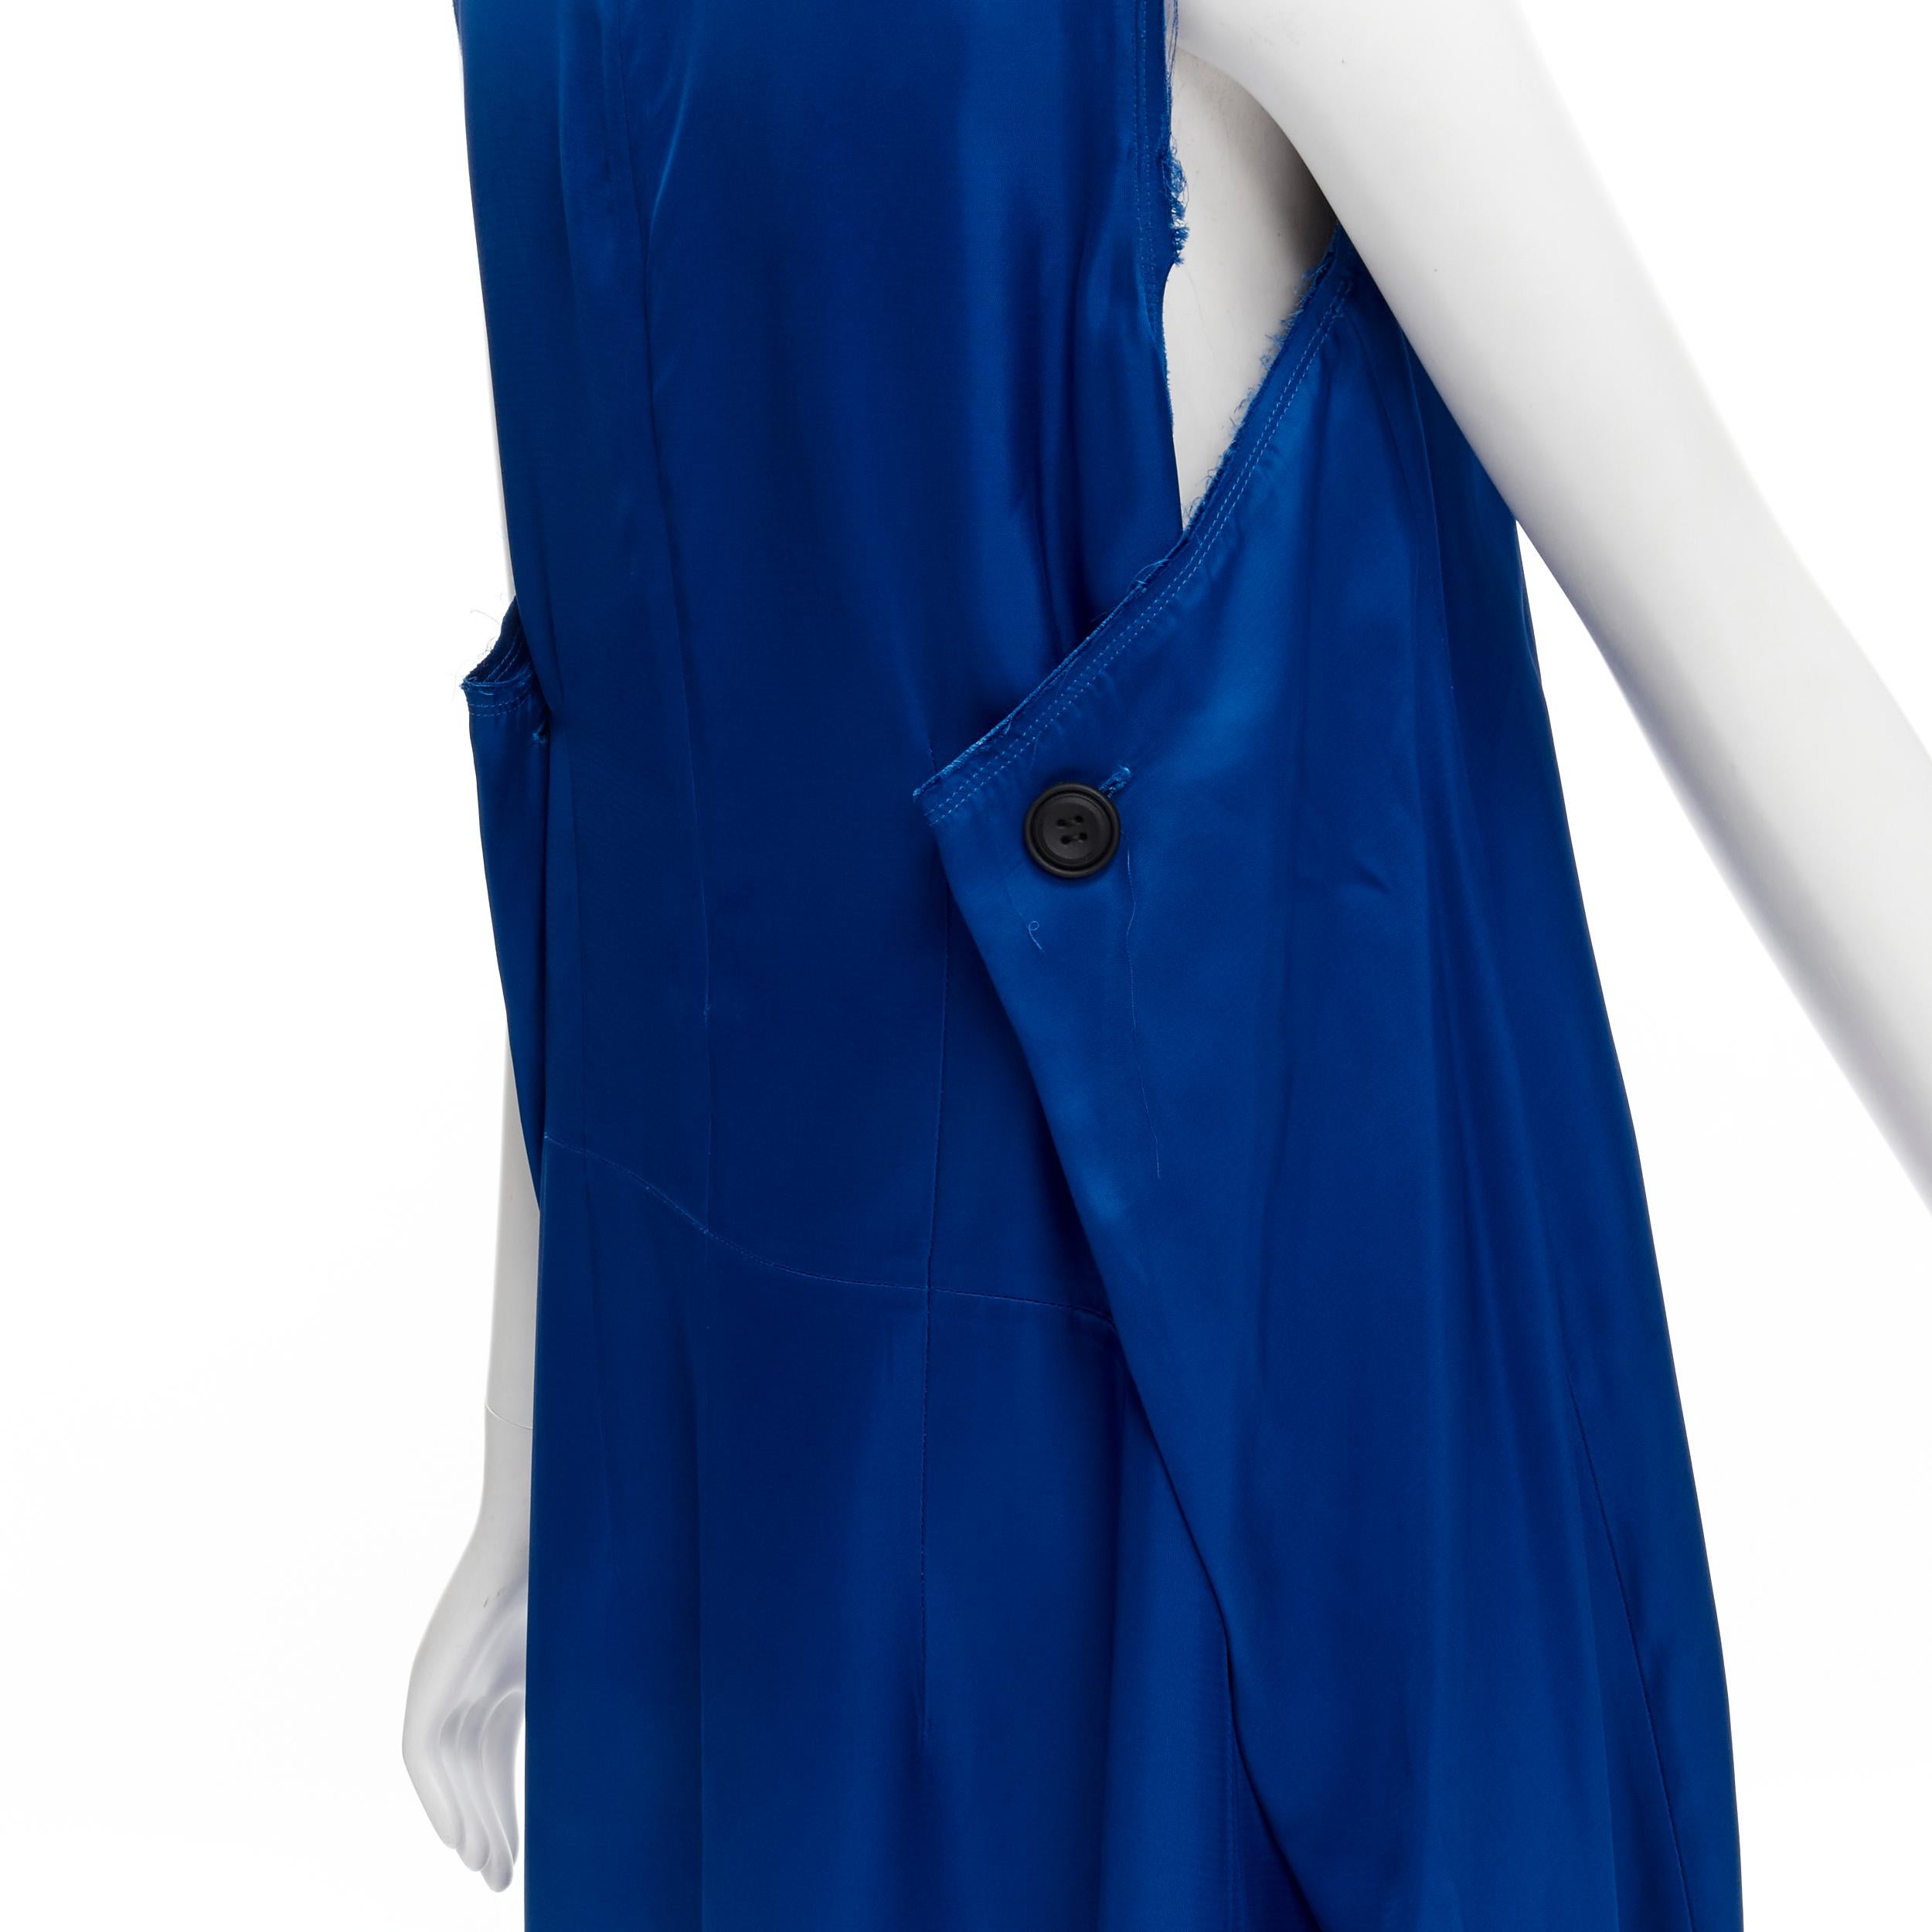 MARNI cobalt blue viscose raw frayed edge step hem folded back dress IT38 XS 
Reference: CELG/A00179 
Brand: Marni 
Material: Viscose 
Color: Blue 
Pattern: Solid 
Closure: Zip 
Extra Detail: Raw frayed edges. Black rubber button pinching volumn at